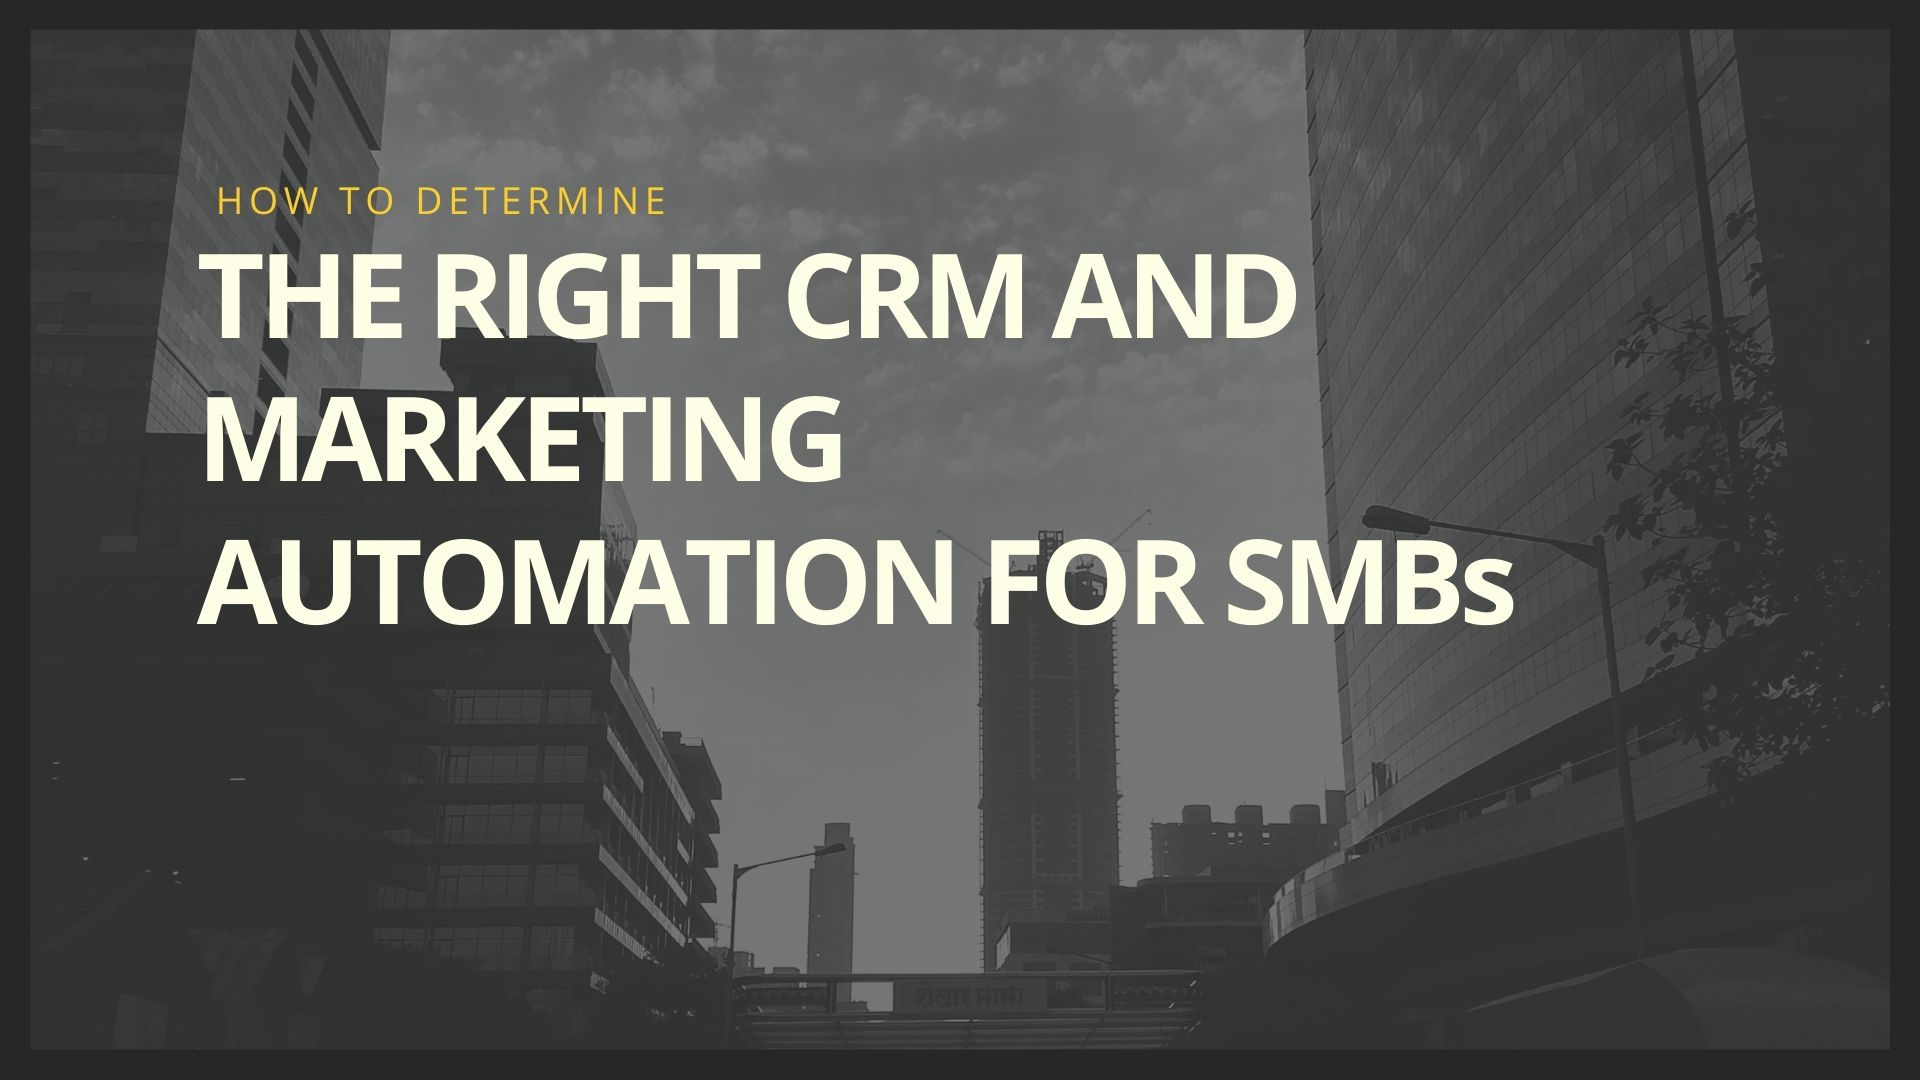 How To Determine The Right CRM And Marketing Automation For SMBs